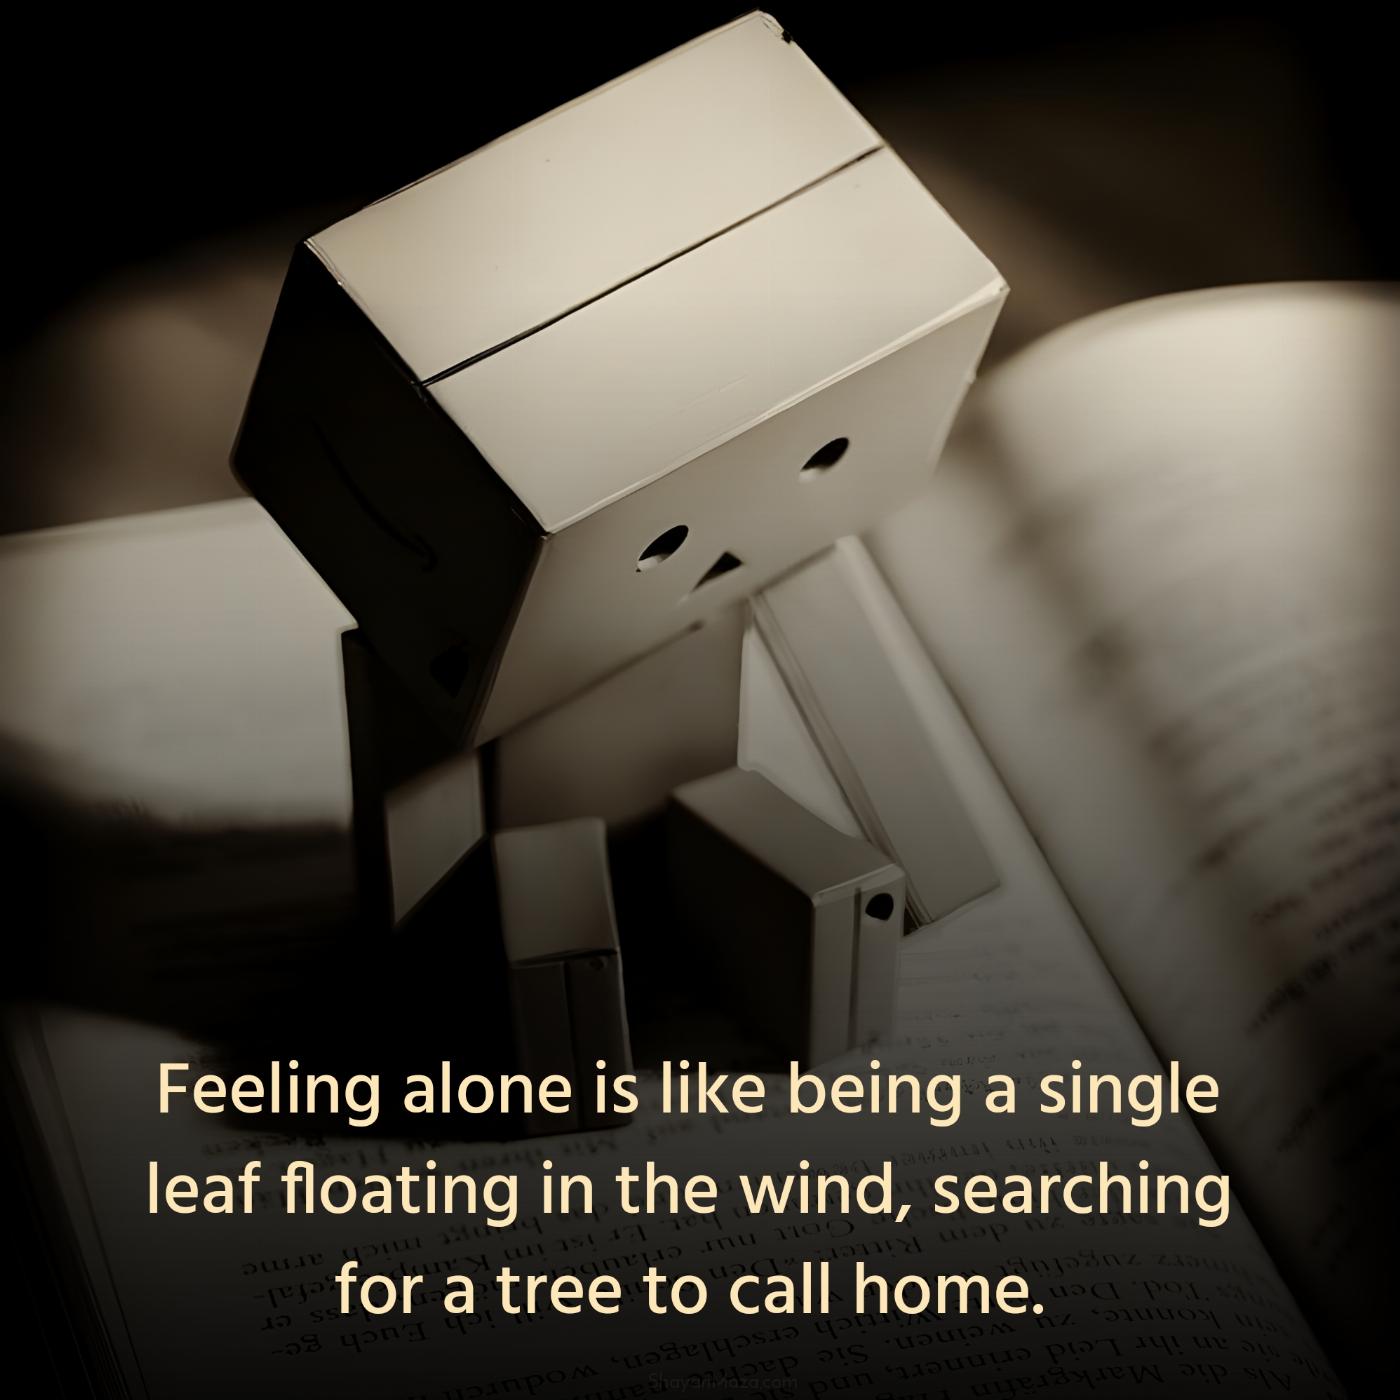 Feeling alone is like being a single leaf floating in the wind